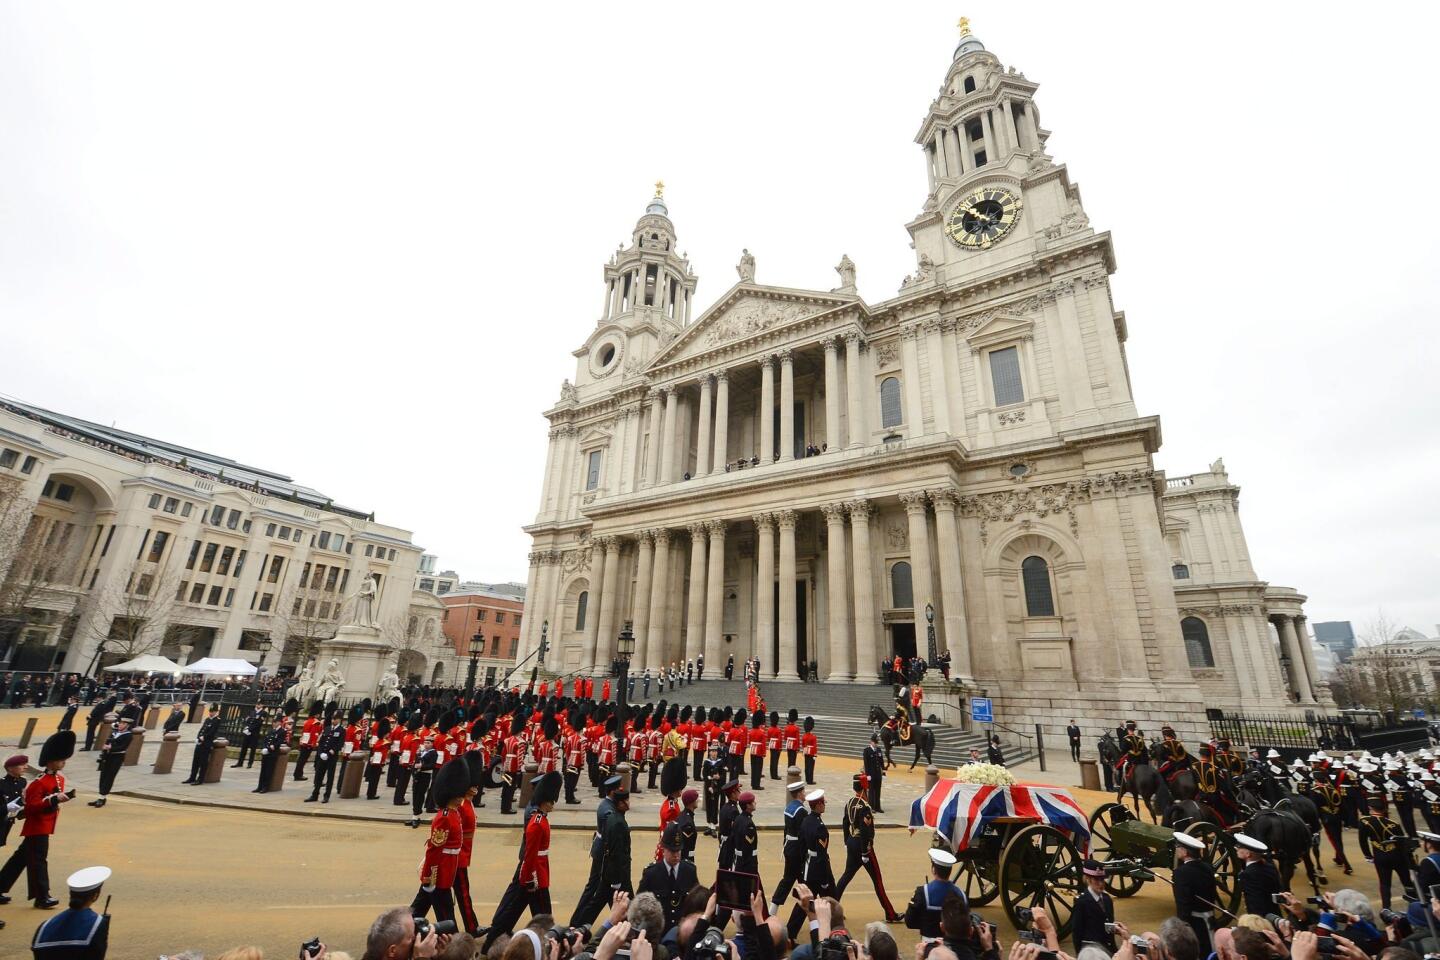 The scene outside St. Paul's Cathedral in central London as a gun carriage brings the coffin of former British Prime Minister Margaret Thatcher.